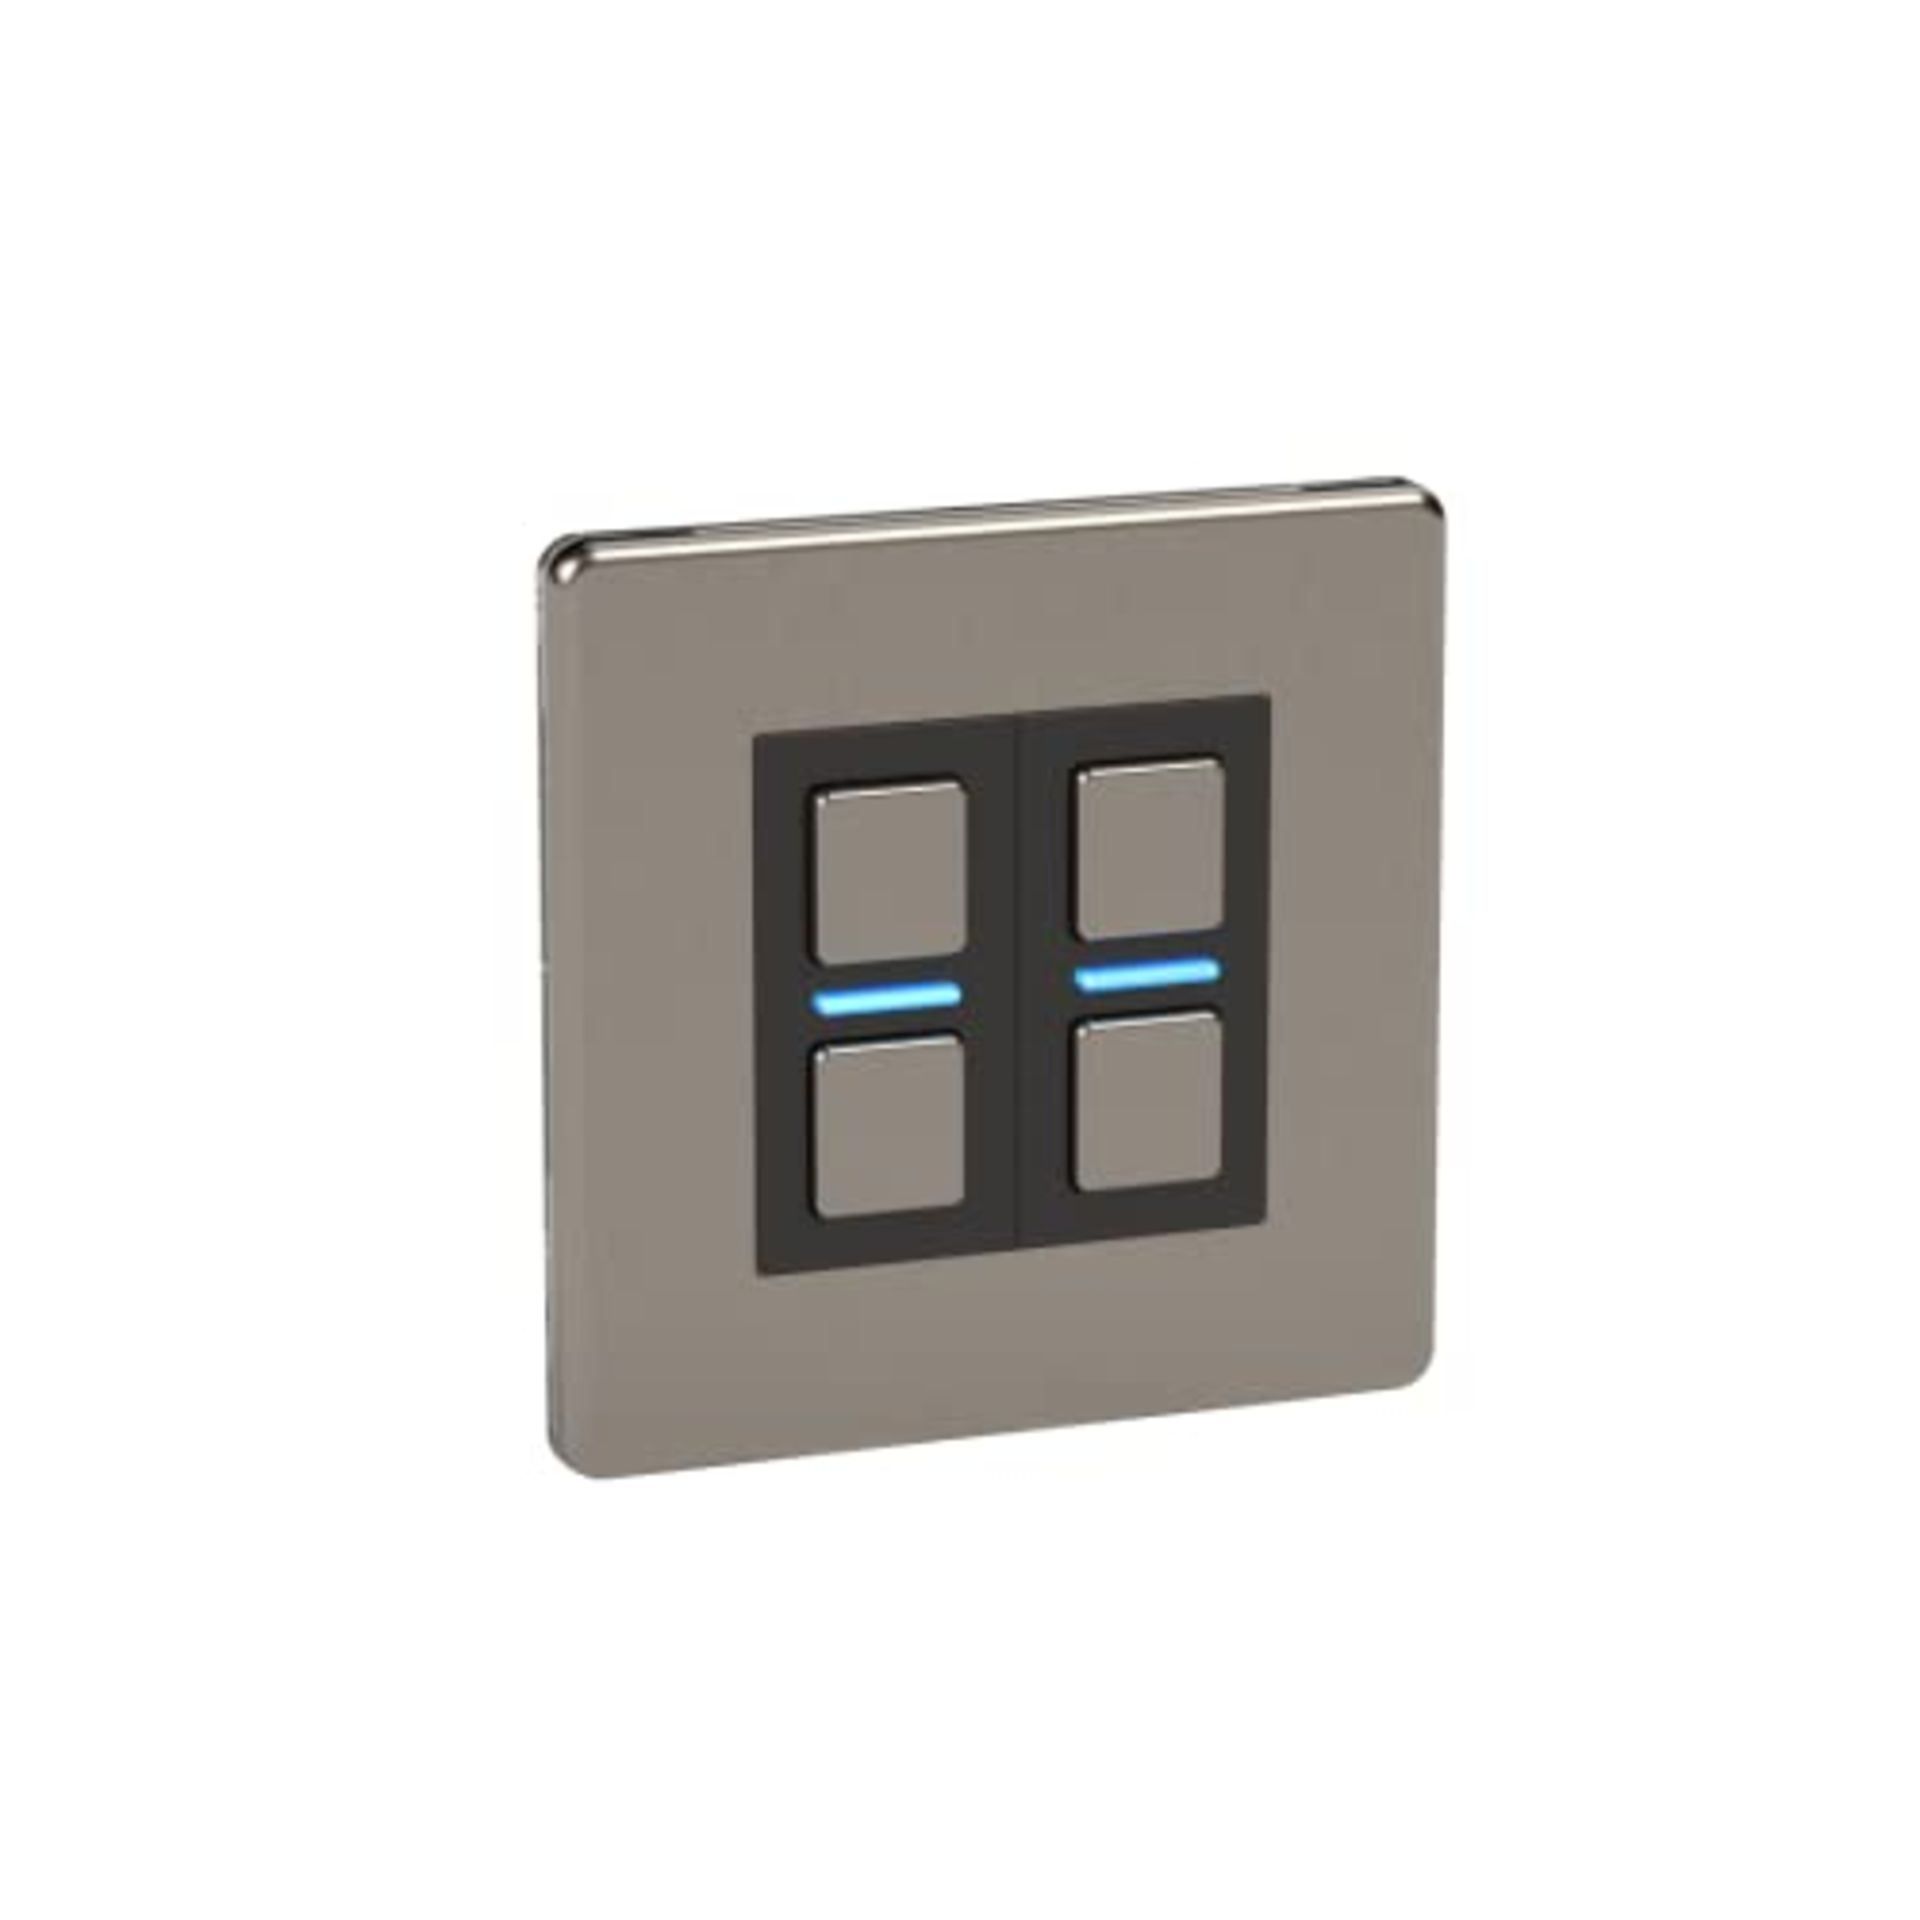 RRP £119.00 Lightwave LP22MK2 Smart Dimmer with Energy Monitoring, 2 Gang, Stainless Steel - Works - Image 5 of 10